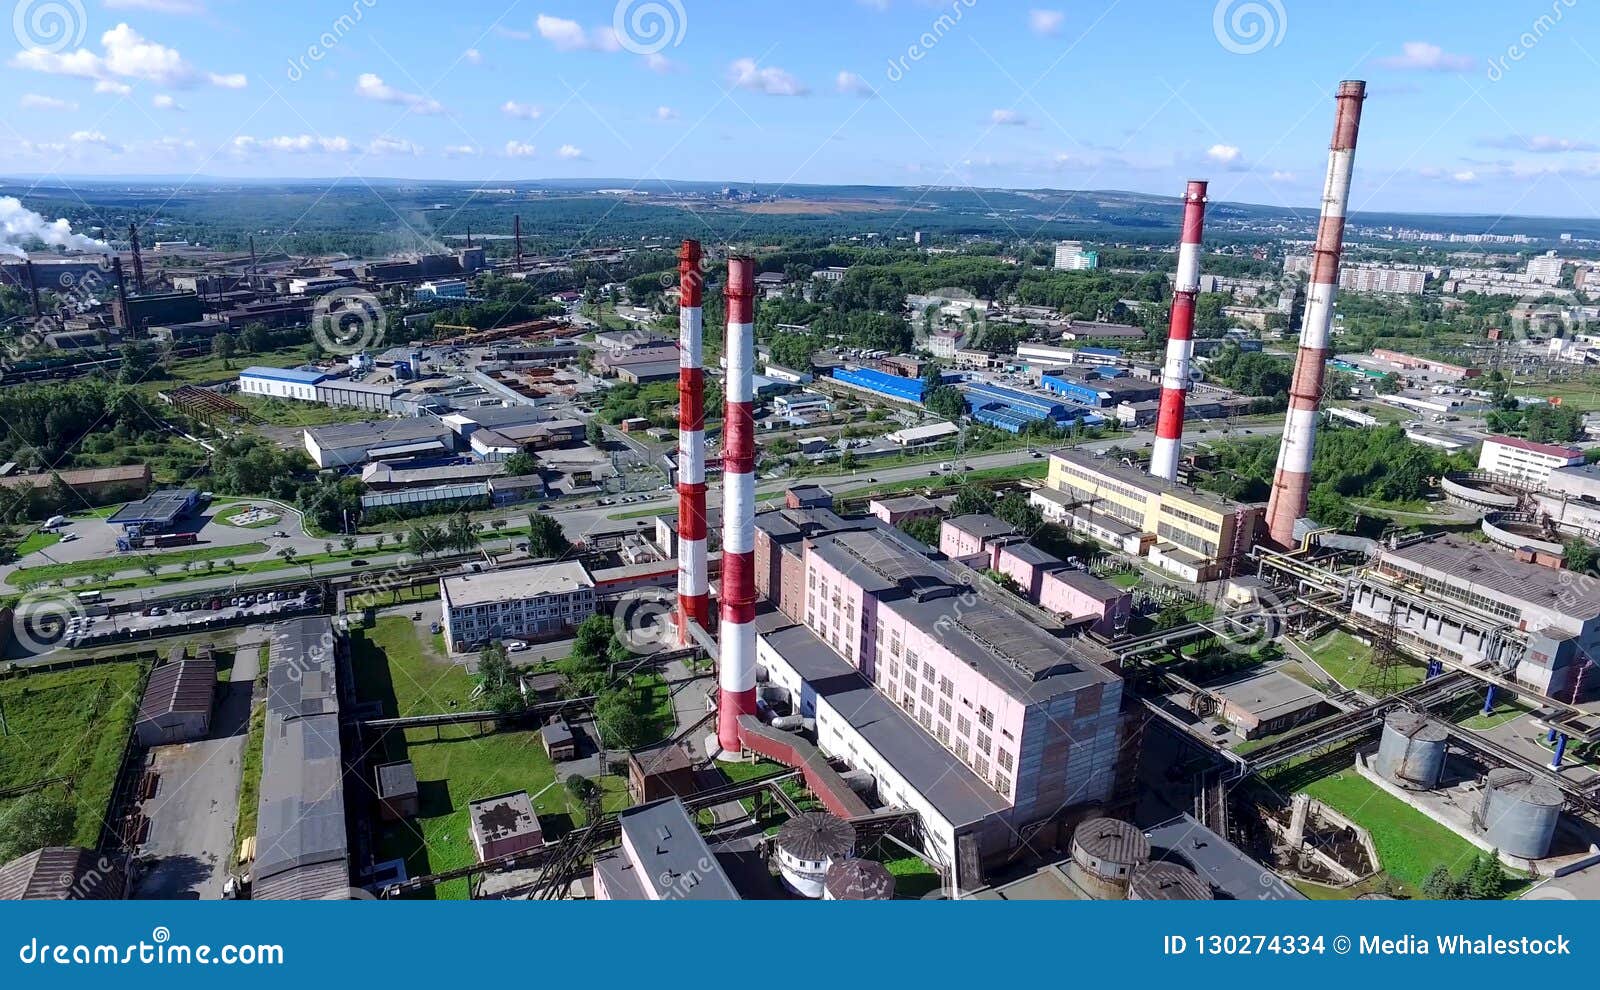 Top View Of Industrial Area Of City And Plant With Red And White Pipes Panorama Of City With Factories And Plants Stock Photo Image Of Industry Employment